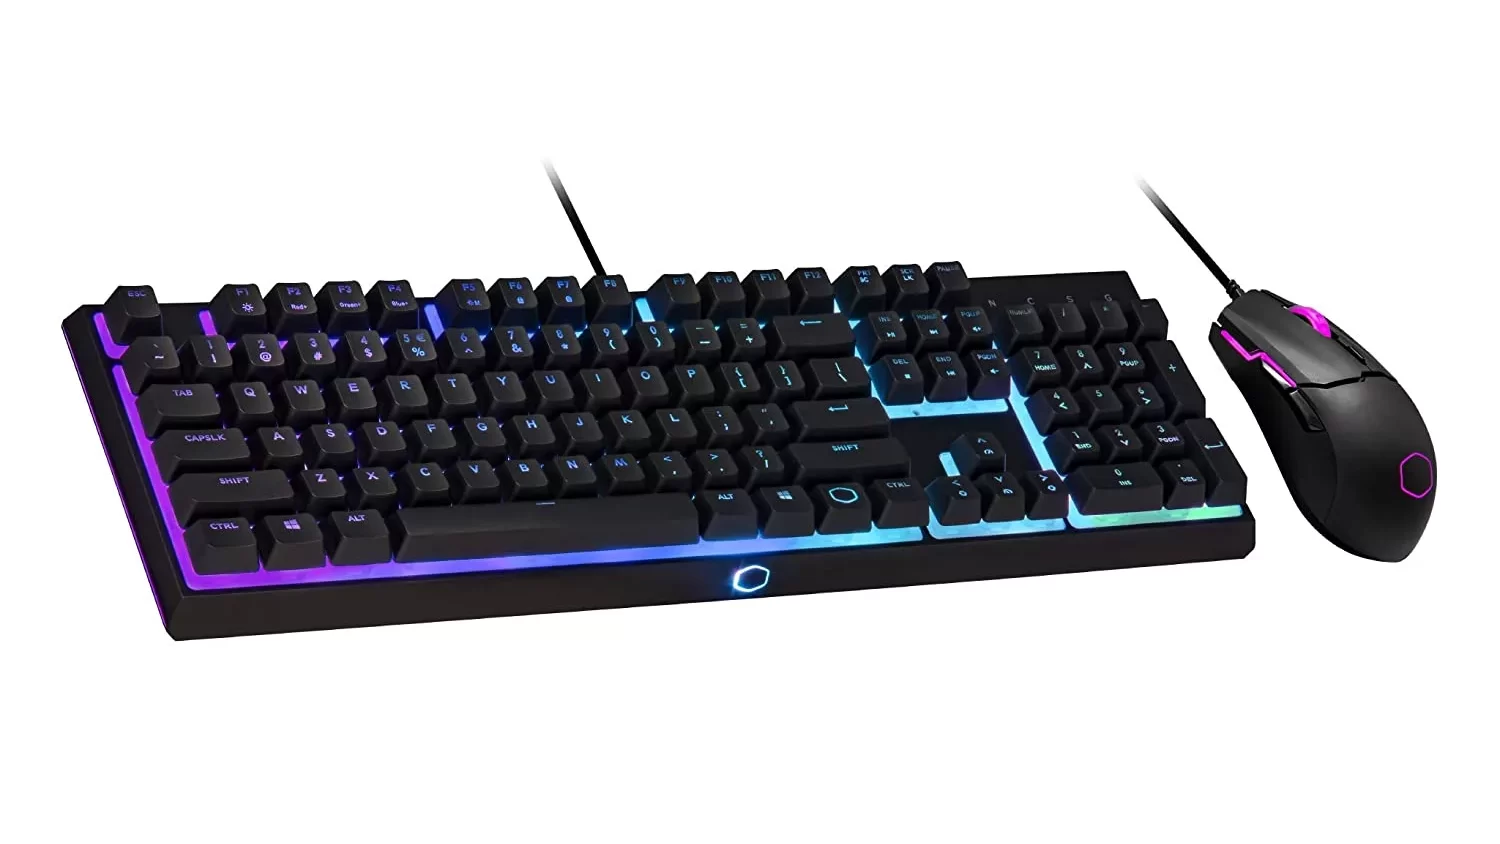 Cooler Master MS110 - Best Gaming Keyboard andMouse Combo Under 5000